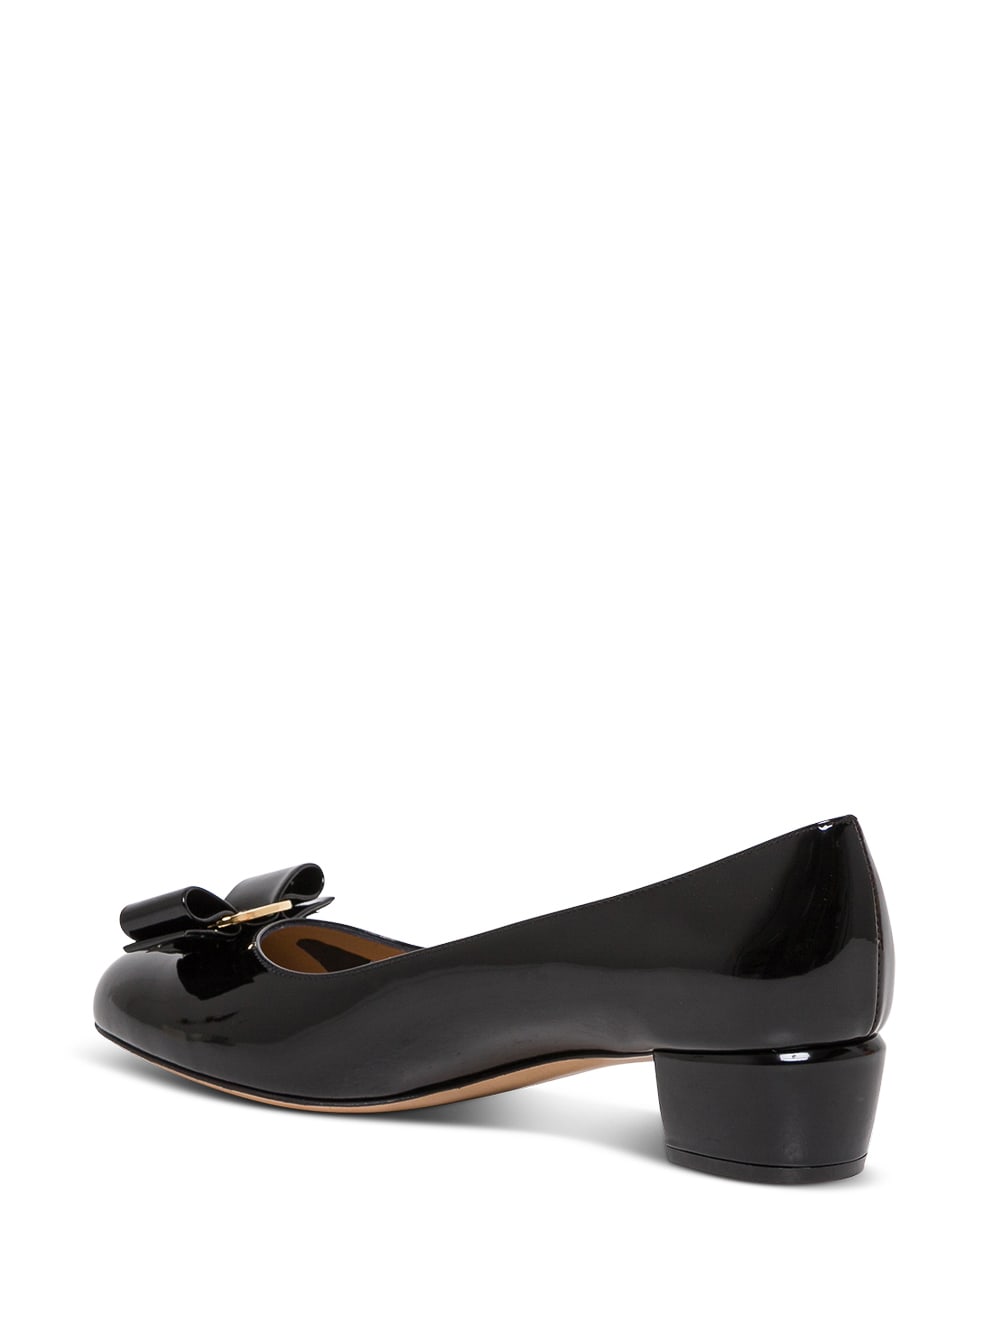 Shop Ferragamo Vara Pumps In Black Patent Leather With Bow